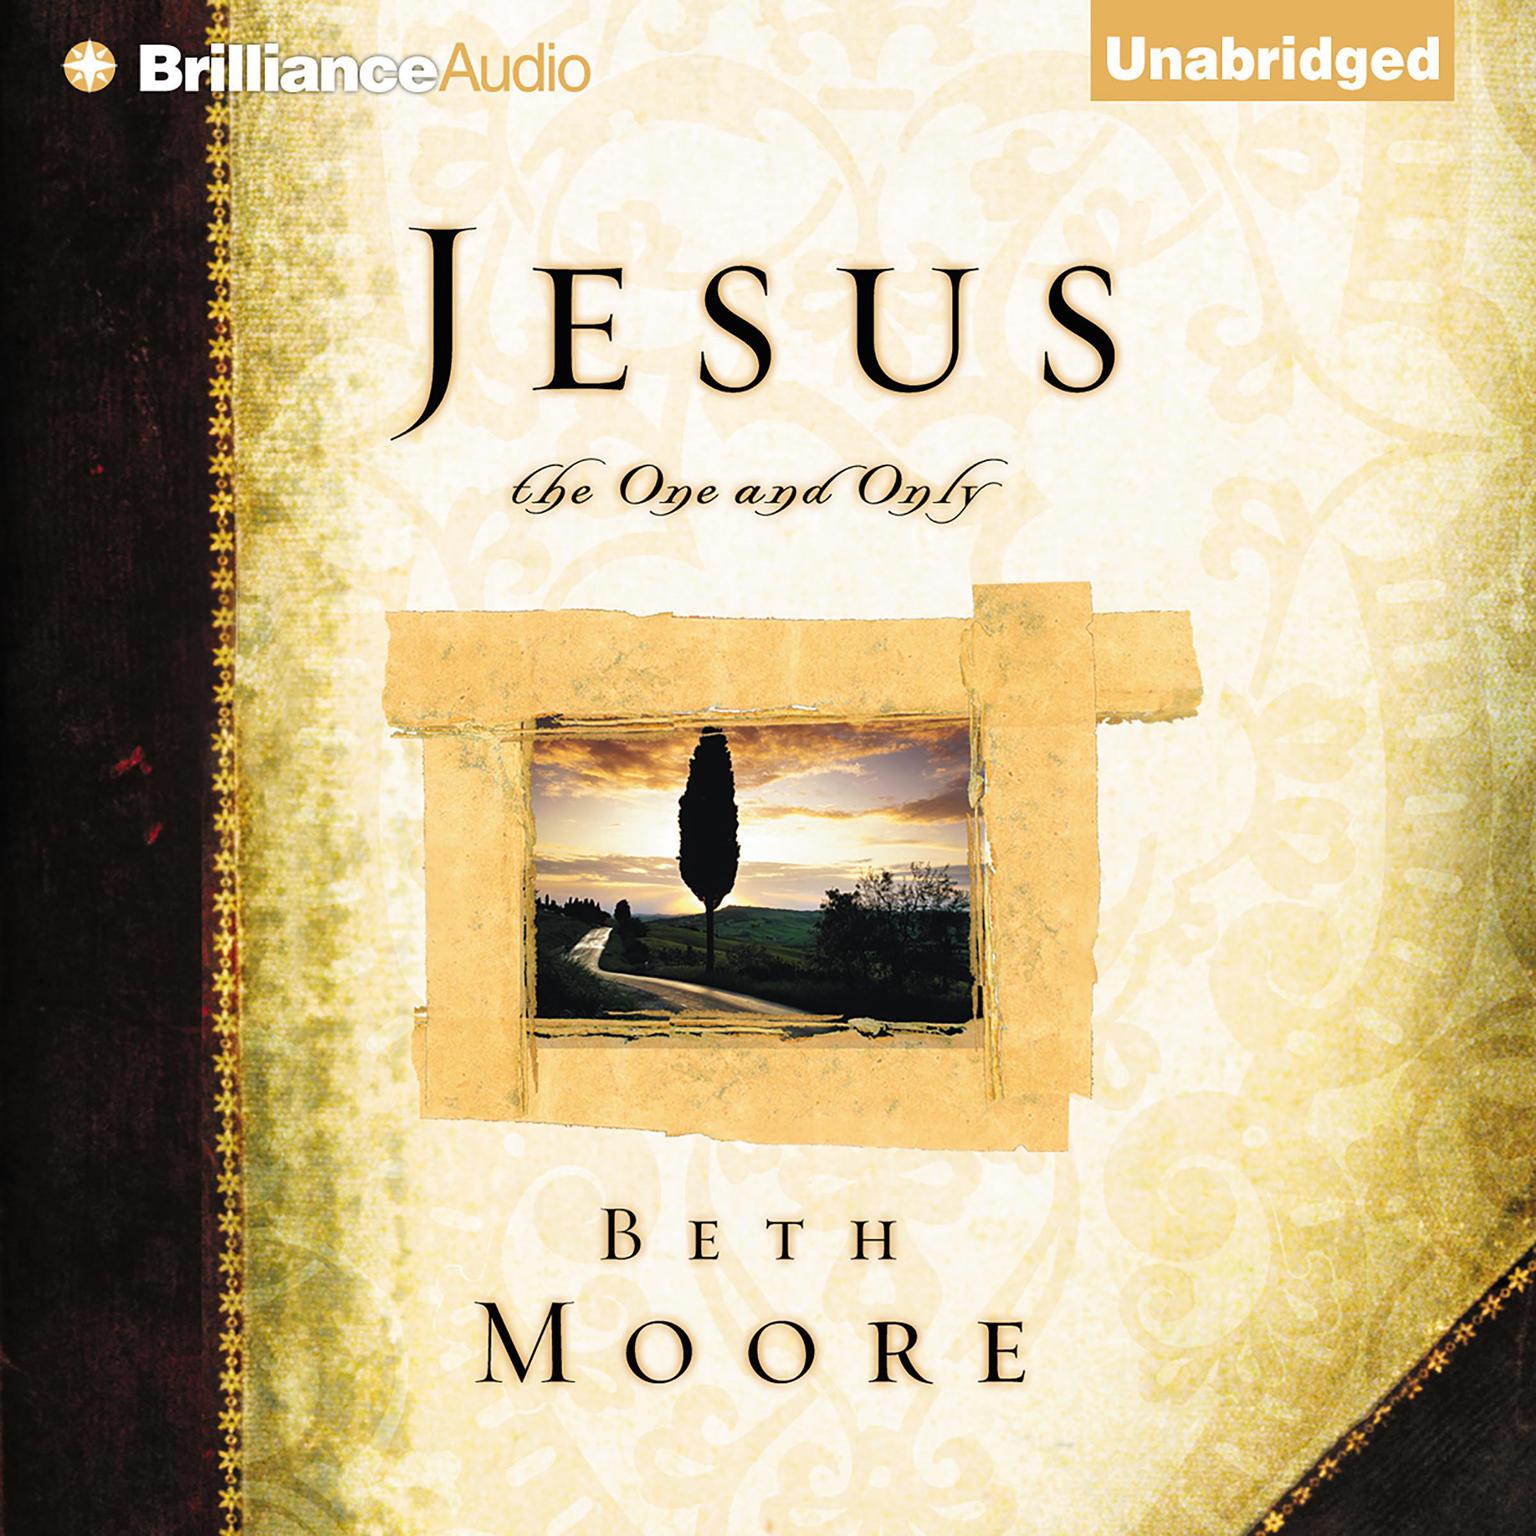 Jesus, the One and Only Audiobook, by Beth Moore